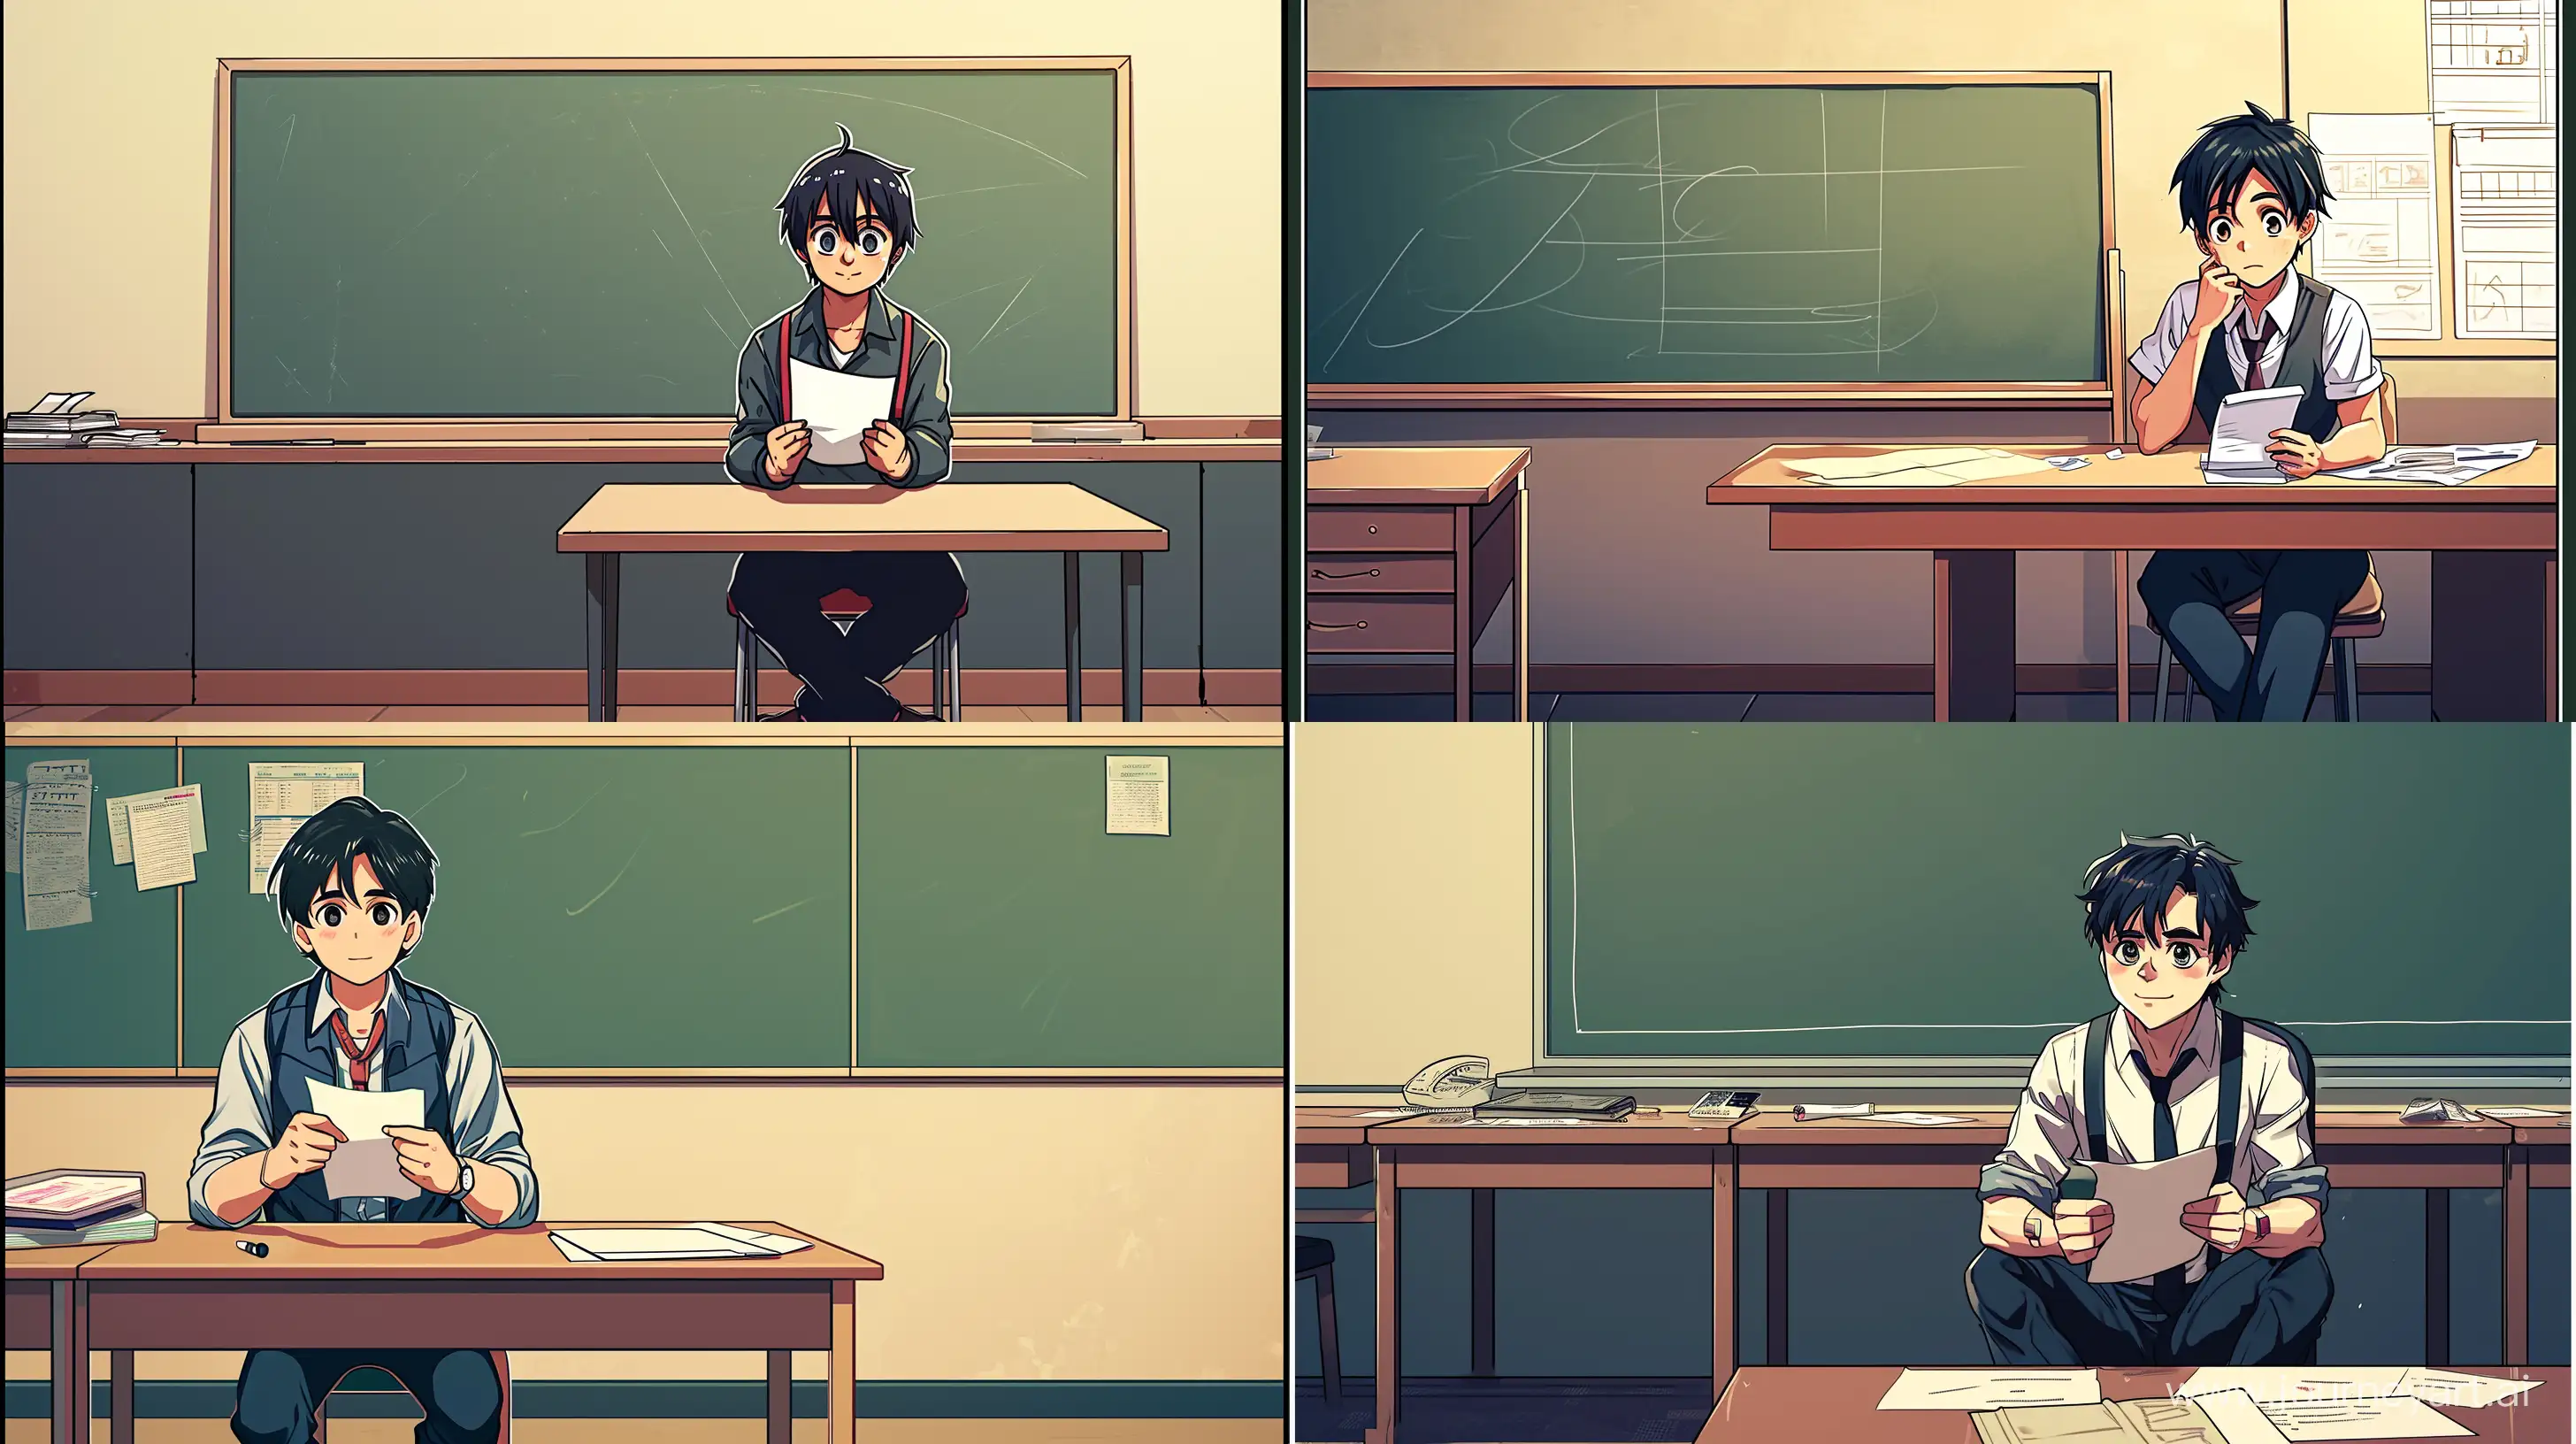 https://midreborn.com/storage/user-photos/4sUNtjKeJnY131d2hhcIudeQDtlaShLLIRQNyOIL.png , a man sitting on a desk in front of a chalkboard holding a paper in his hands, official art, Ay-O, remodernism, a comic book panel, anime style, chibi style, best quality, --v 6 --ar 16:9 --q 2